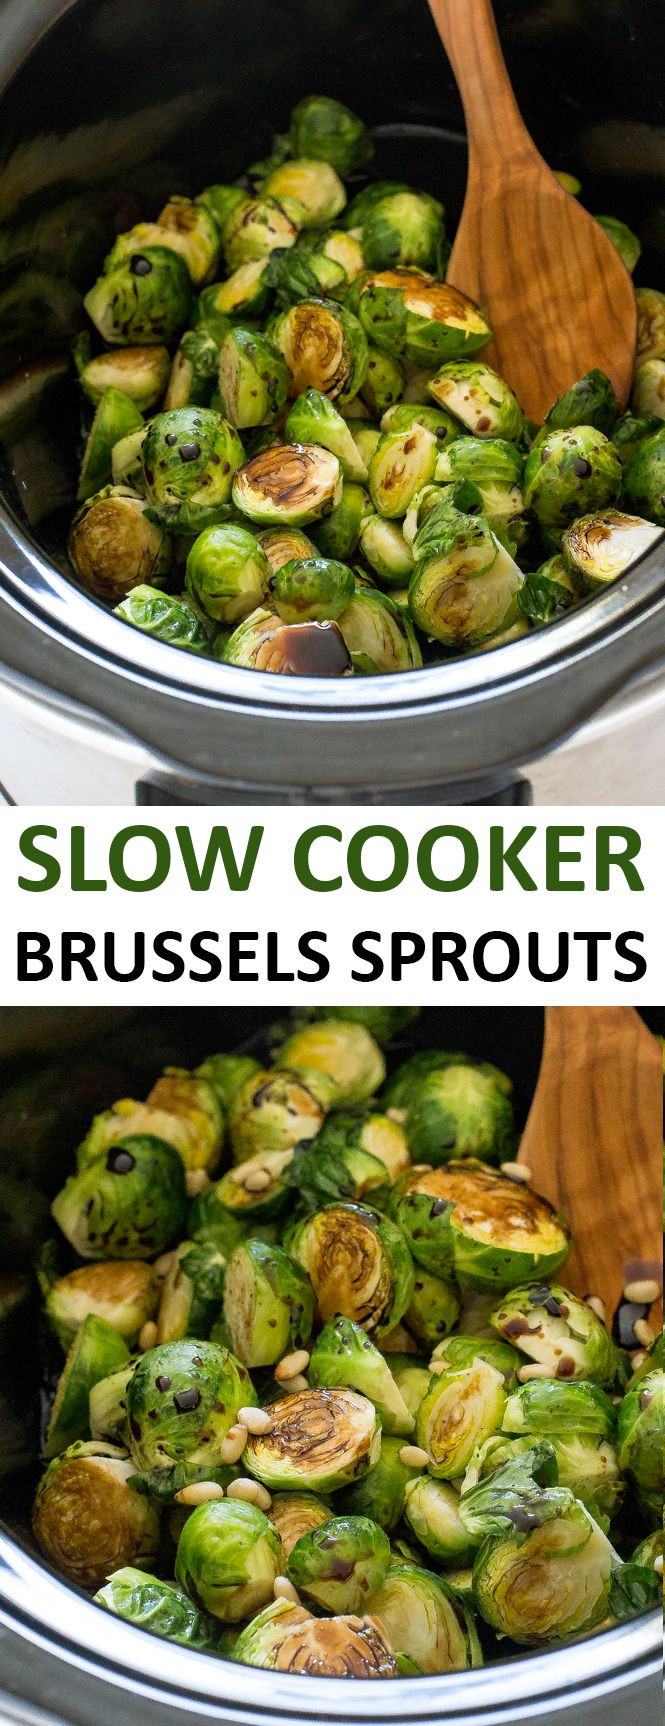 Slow Cooker Side Dishes For Thanksgiving
 Slow Cooker Balsamic Brussels Sprouts Recipe